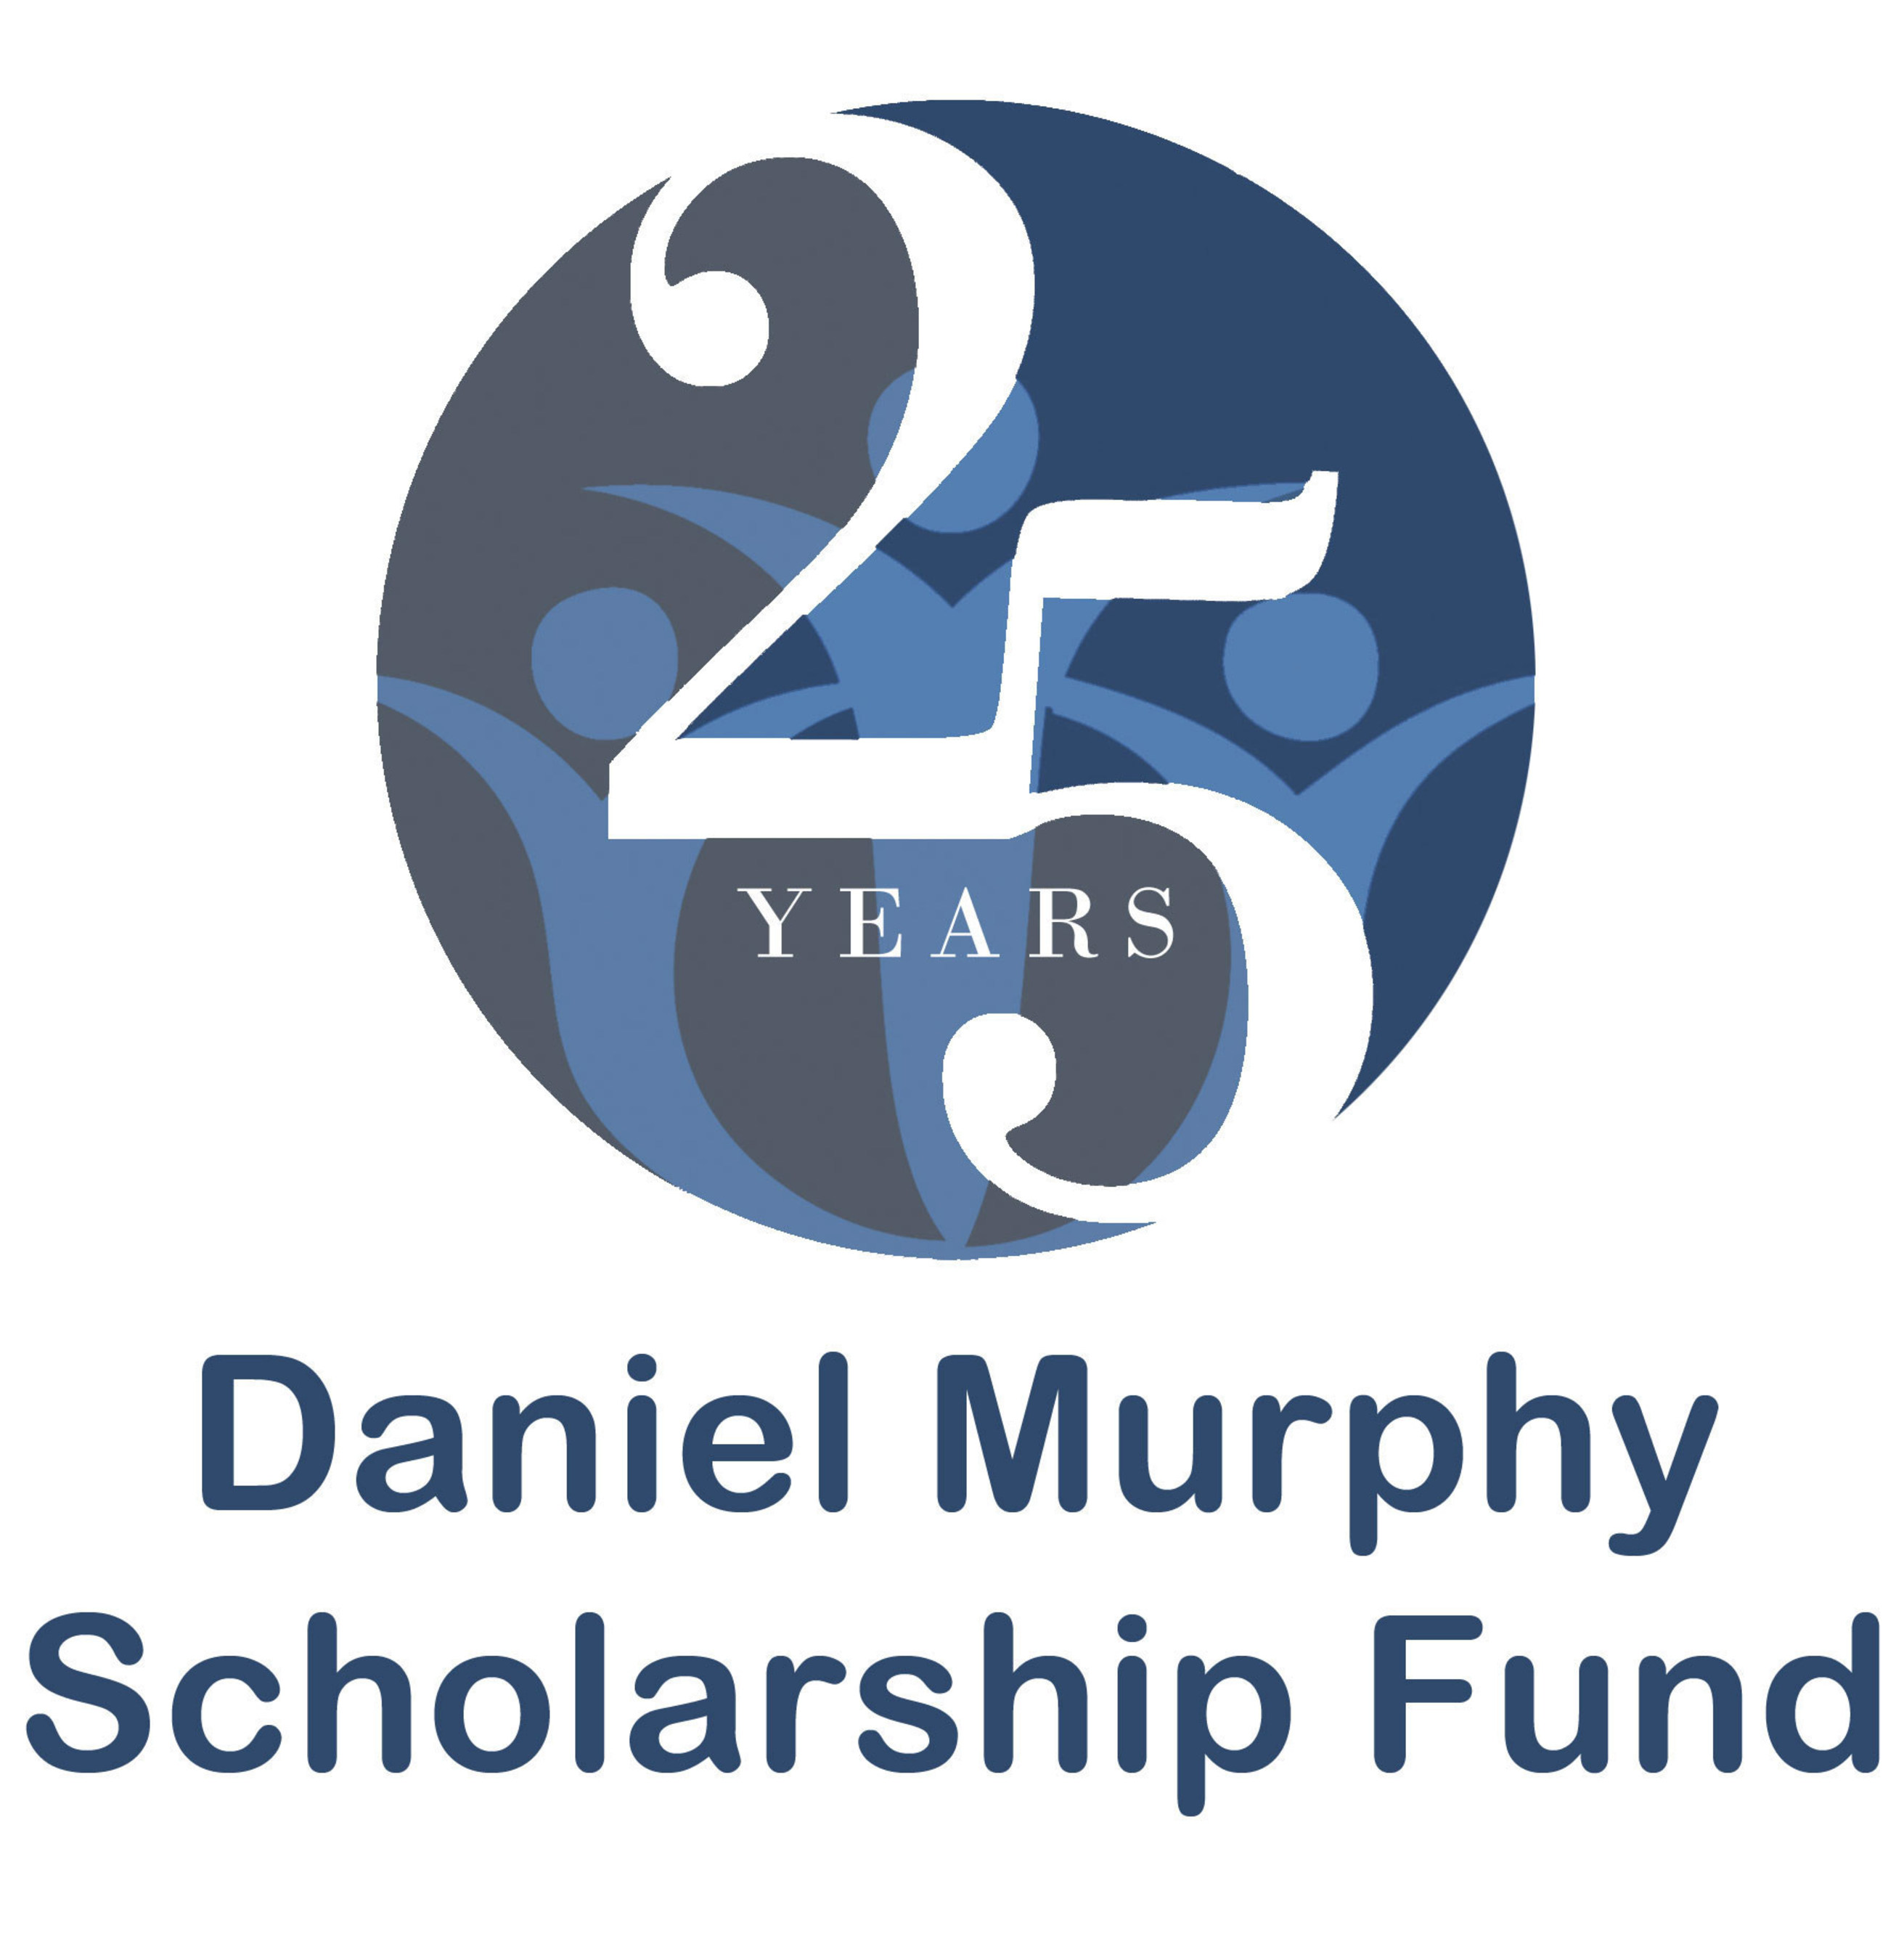 The Daniel Murphy Scholarship Fund Celebrates 25 Years of High School Scholarships to Youth of Chicago and Raises $1.2 Million in Additional Funding